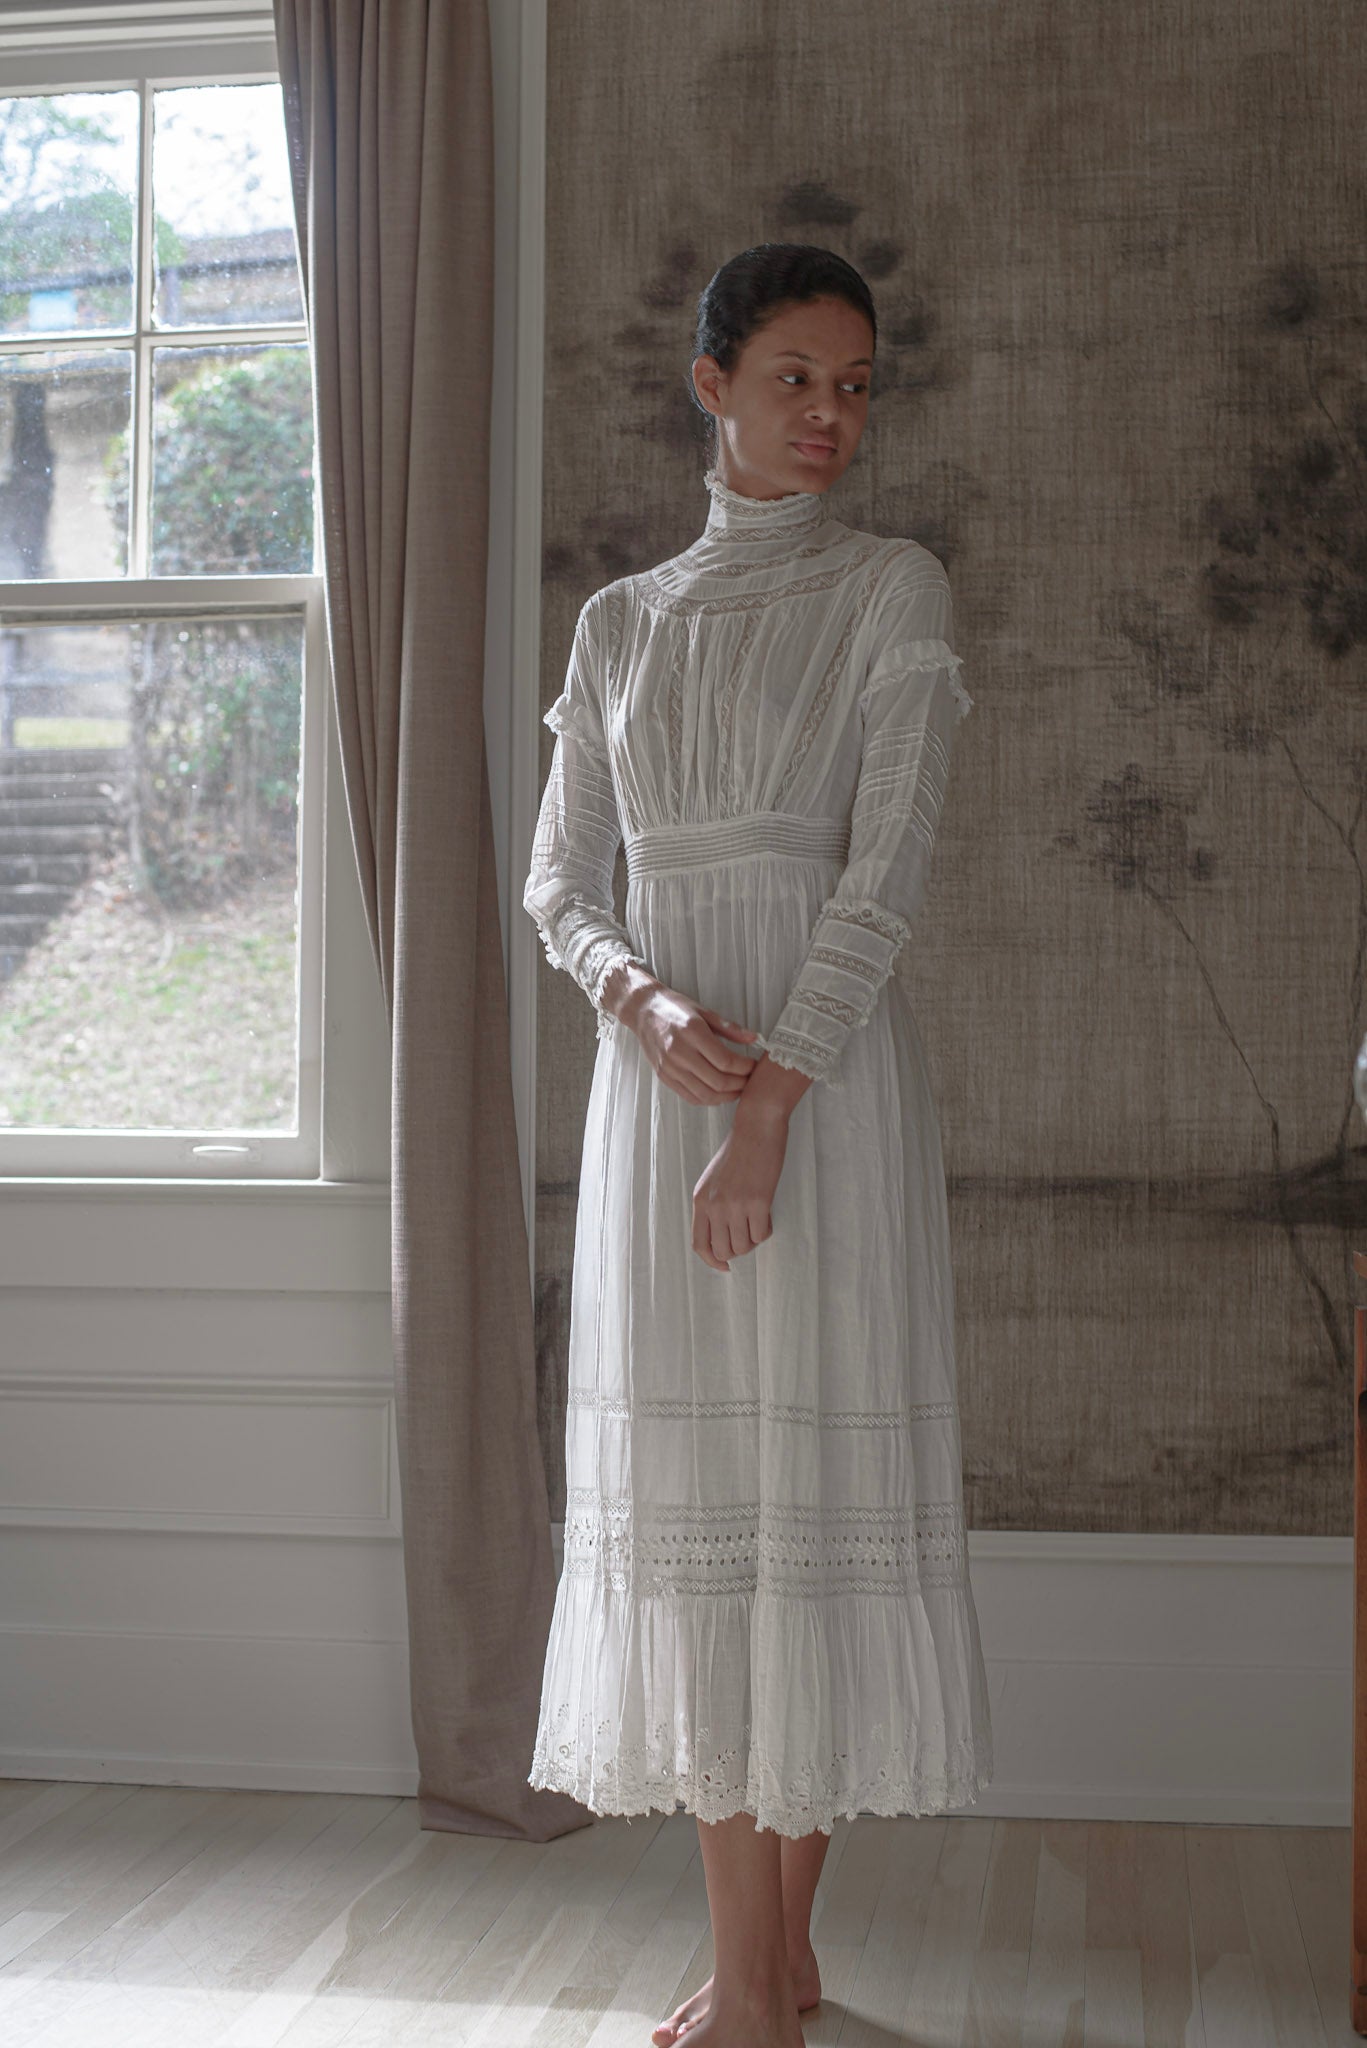 Edwardian White Dress In Cotton and Lace